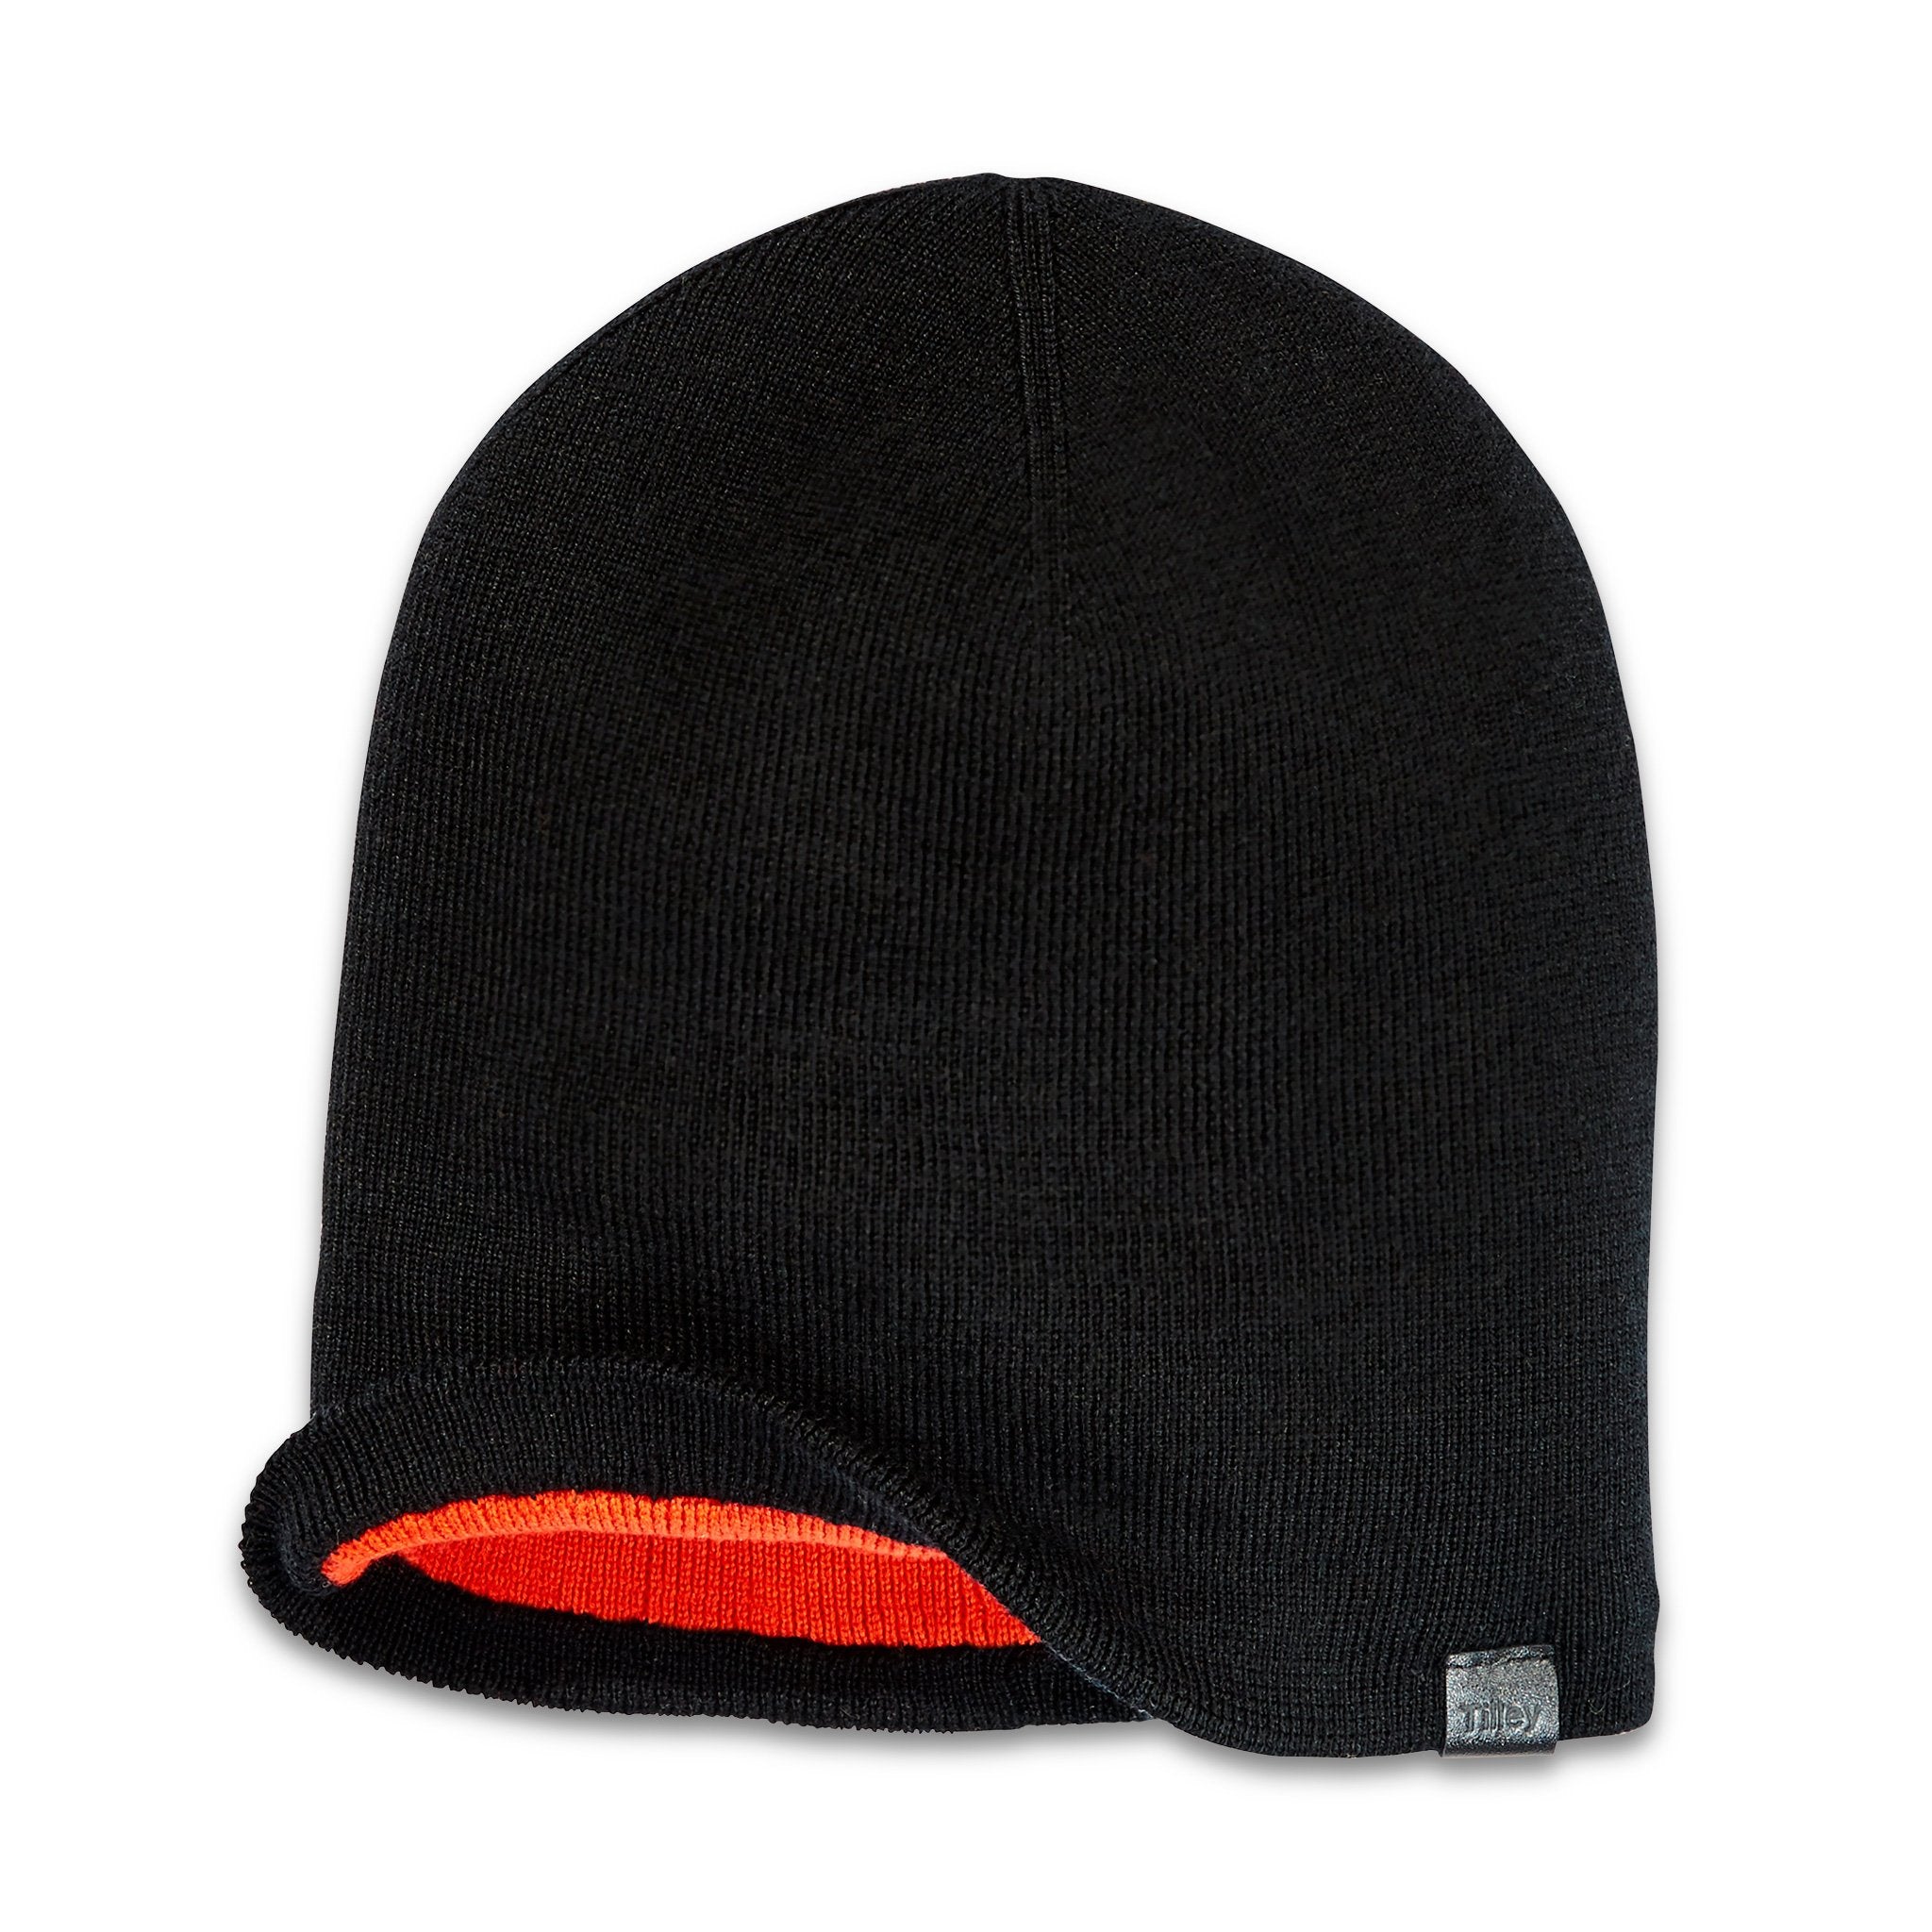 Tilley Slouch Reversible Toque in Black/Red